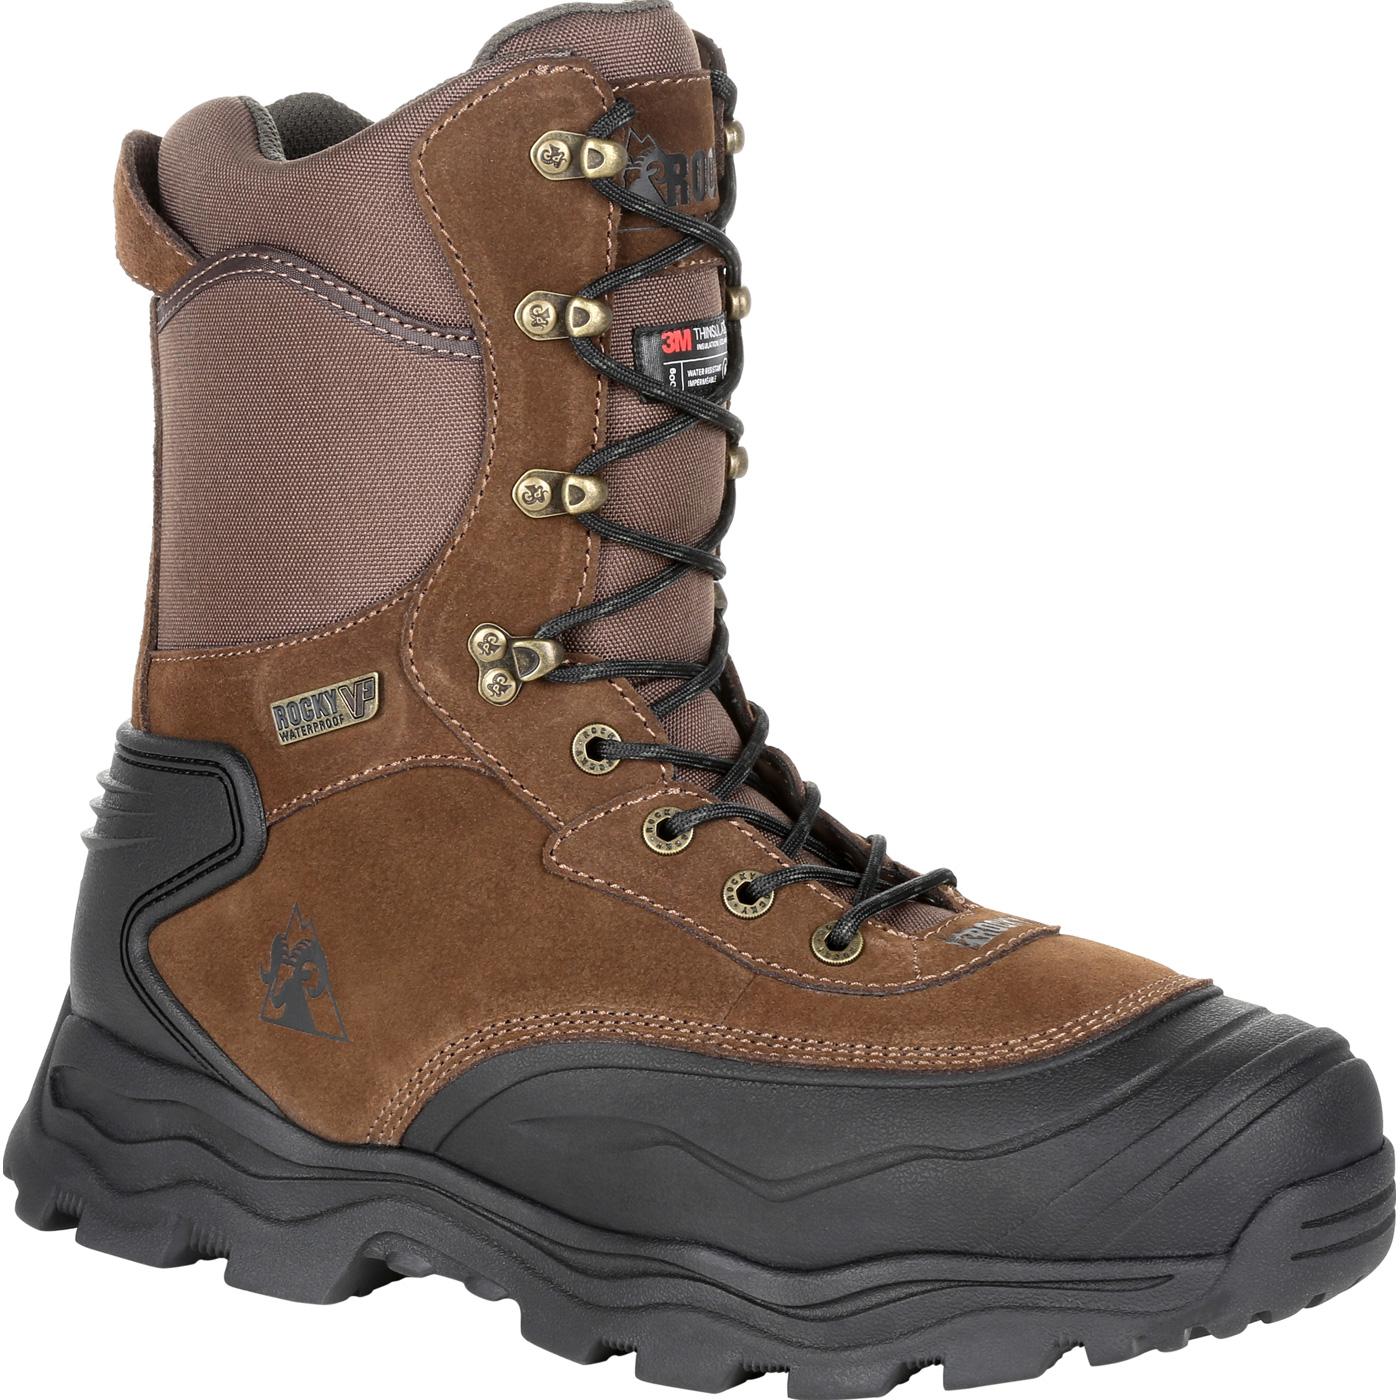 Rocky Multi-Trax: 800G Insulated Waterproof Outdoor Boot, RKS0417